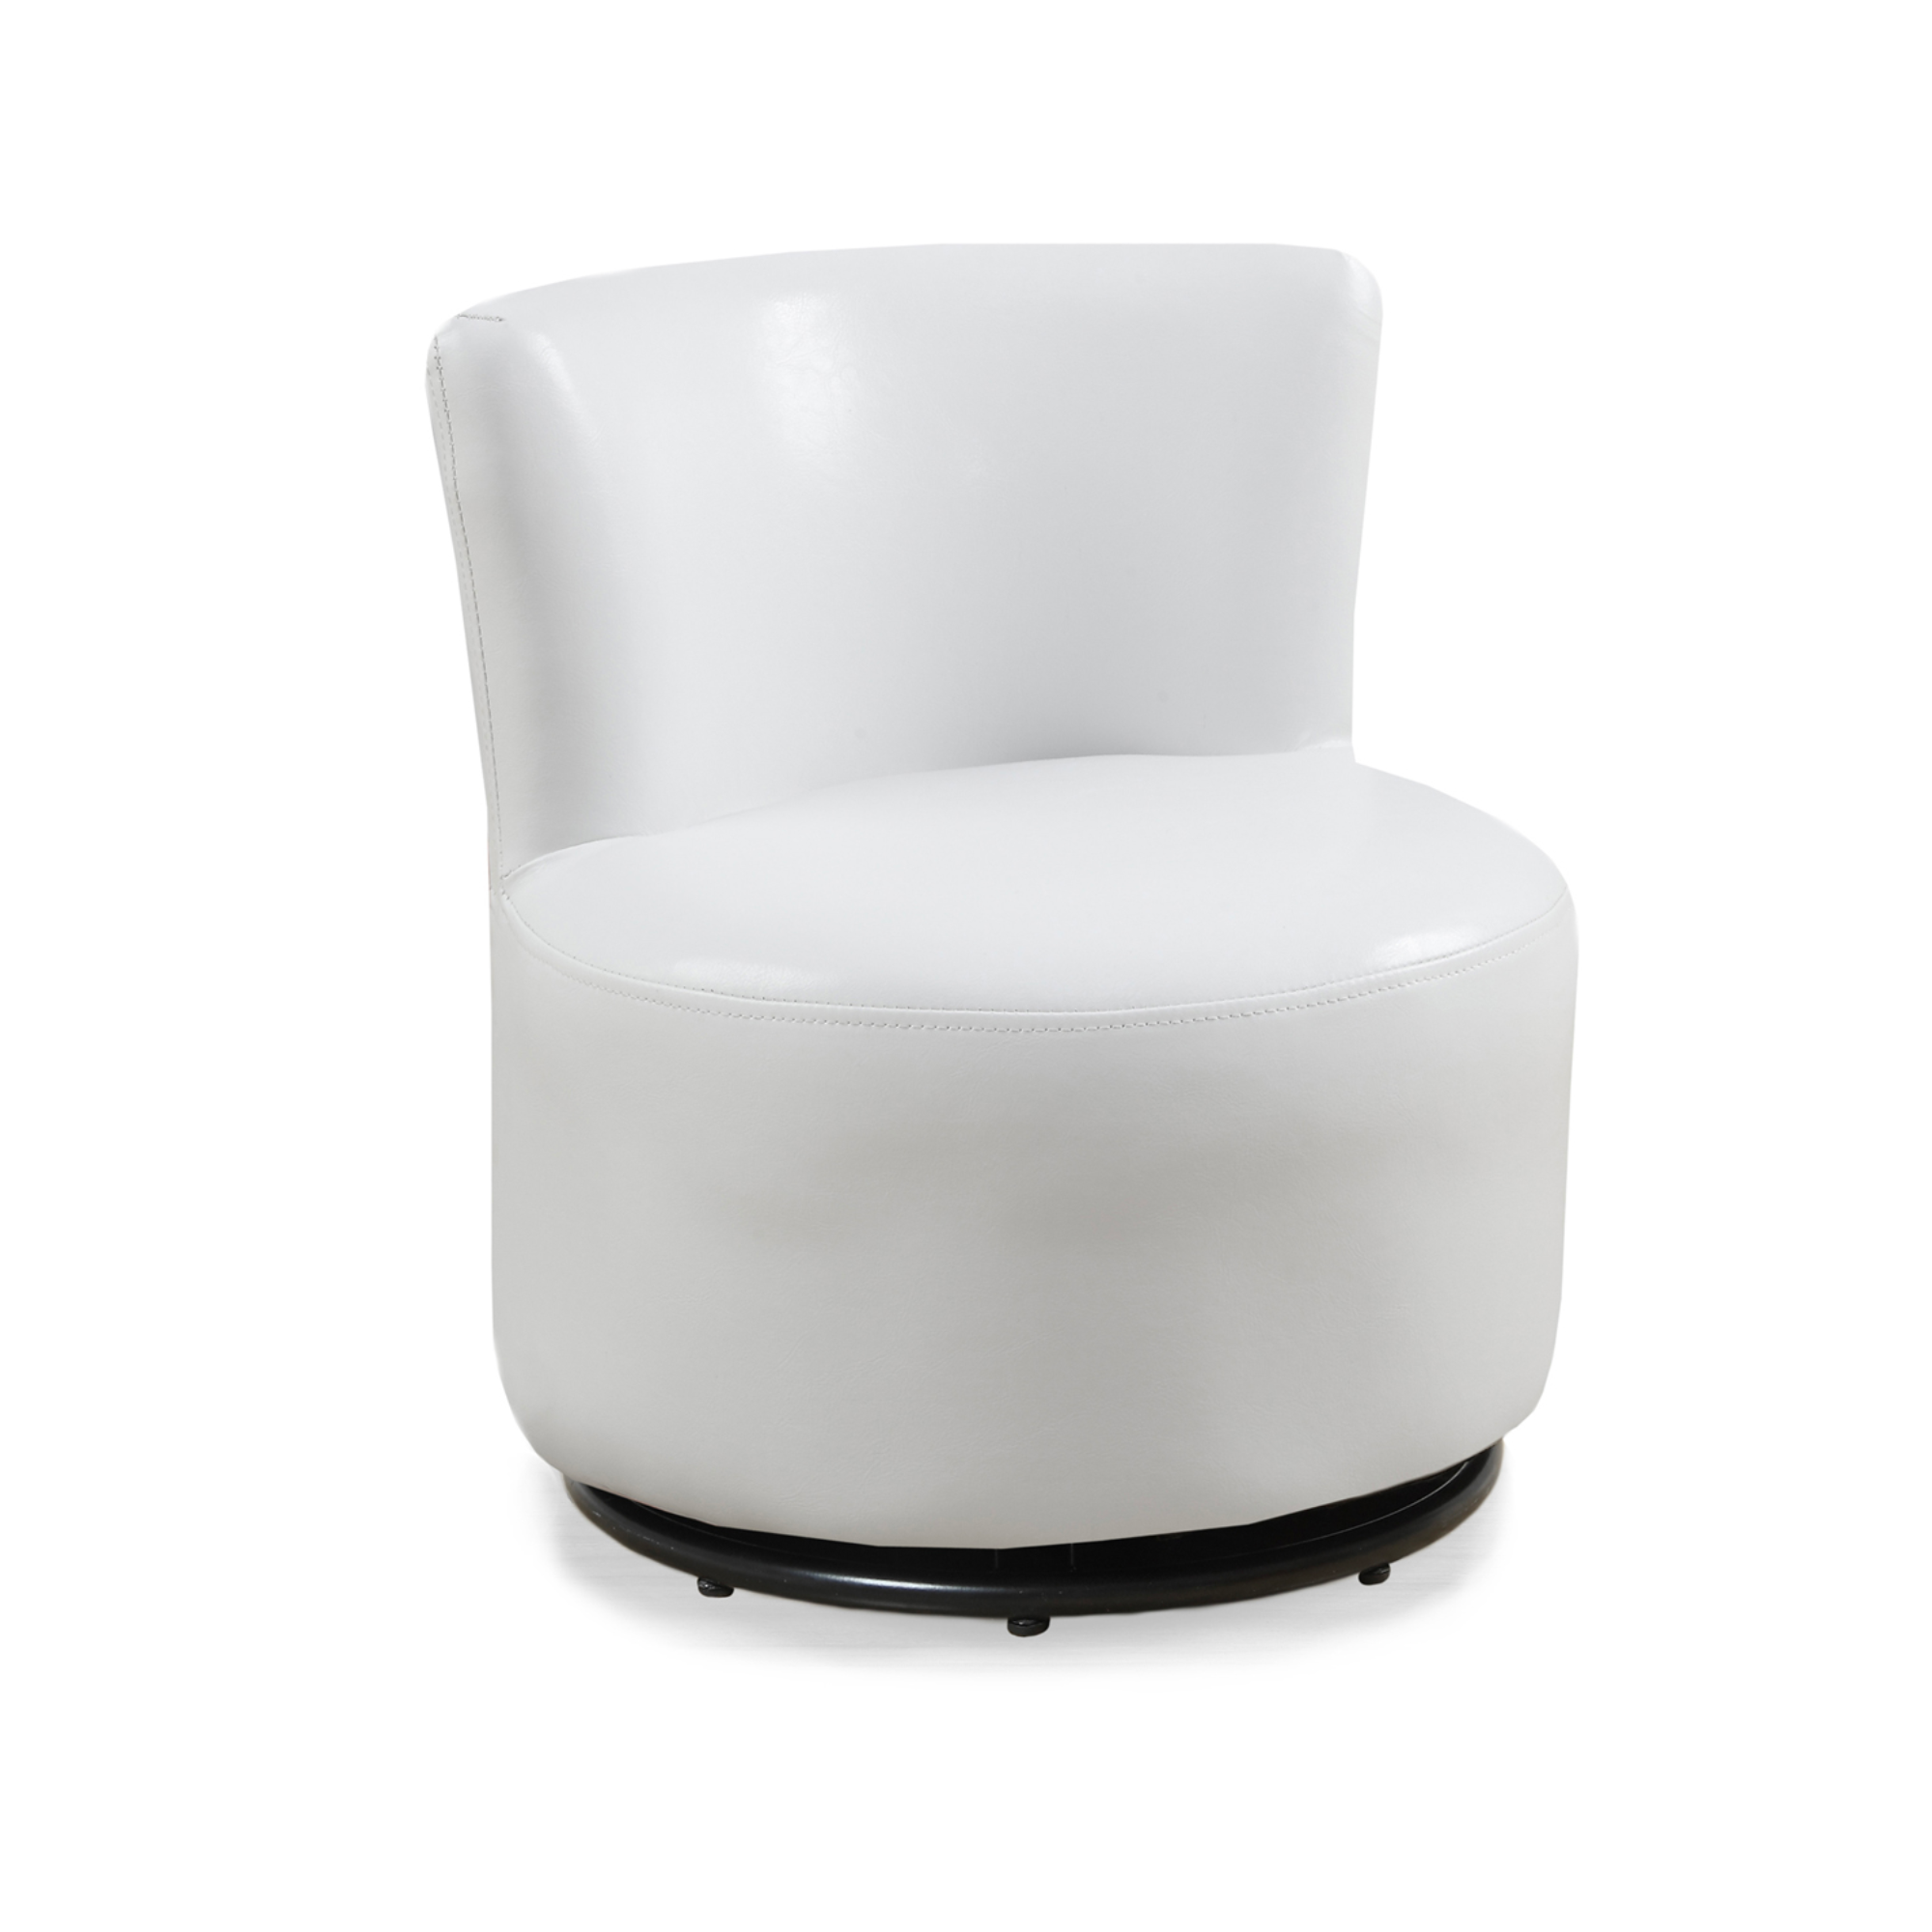 JUVENILE CHAIR - SWIVEL / WHITE LEATHER-LOOK